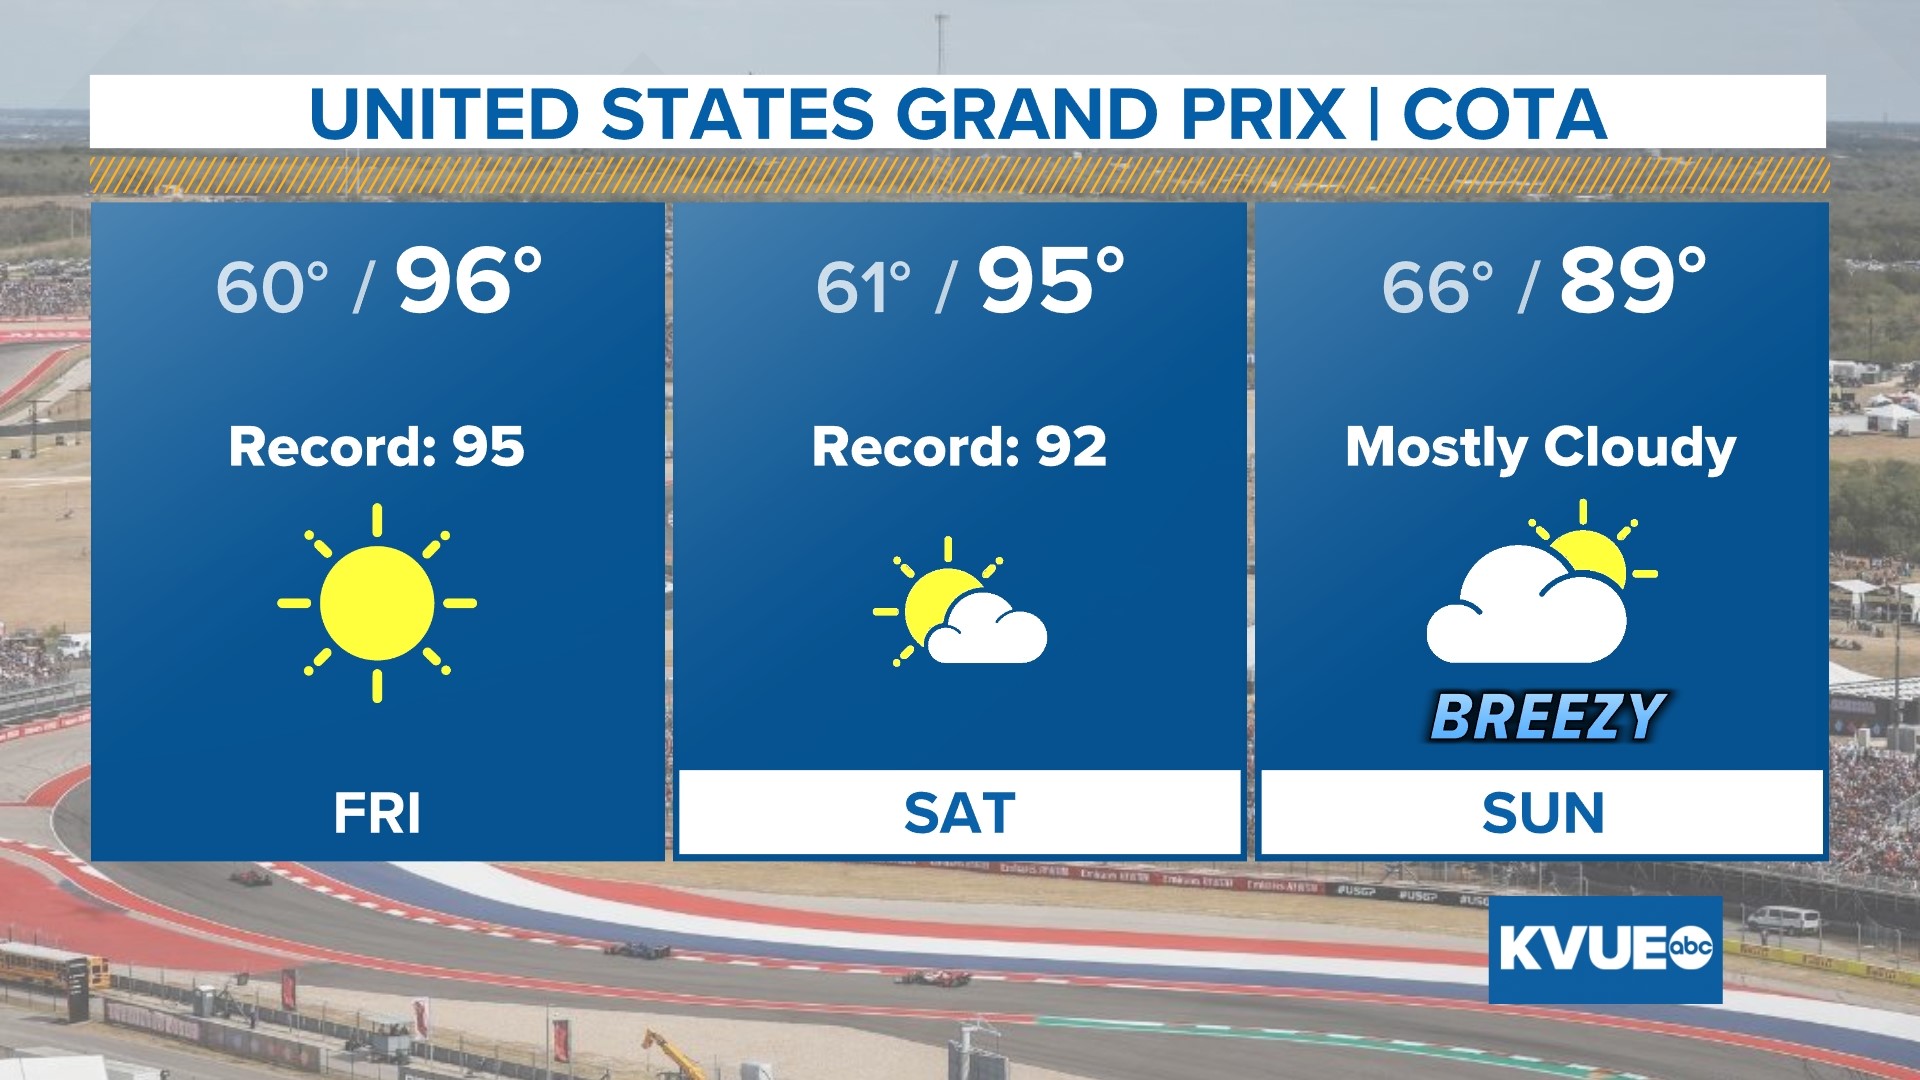 While we have experienced fall-like temperatures over the past few days, expect things to change heading into the Formula 1 US Grand Prix at COTA.